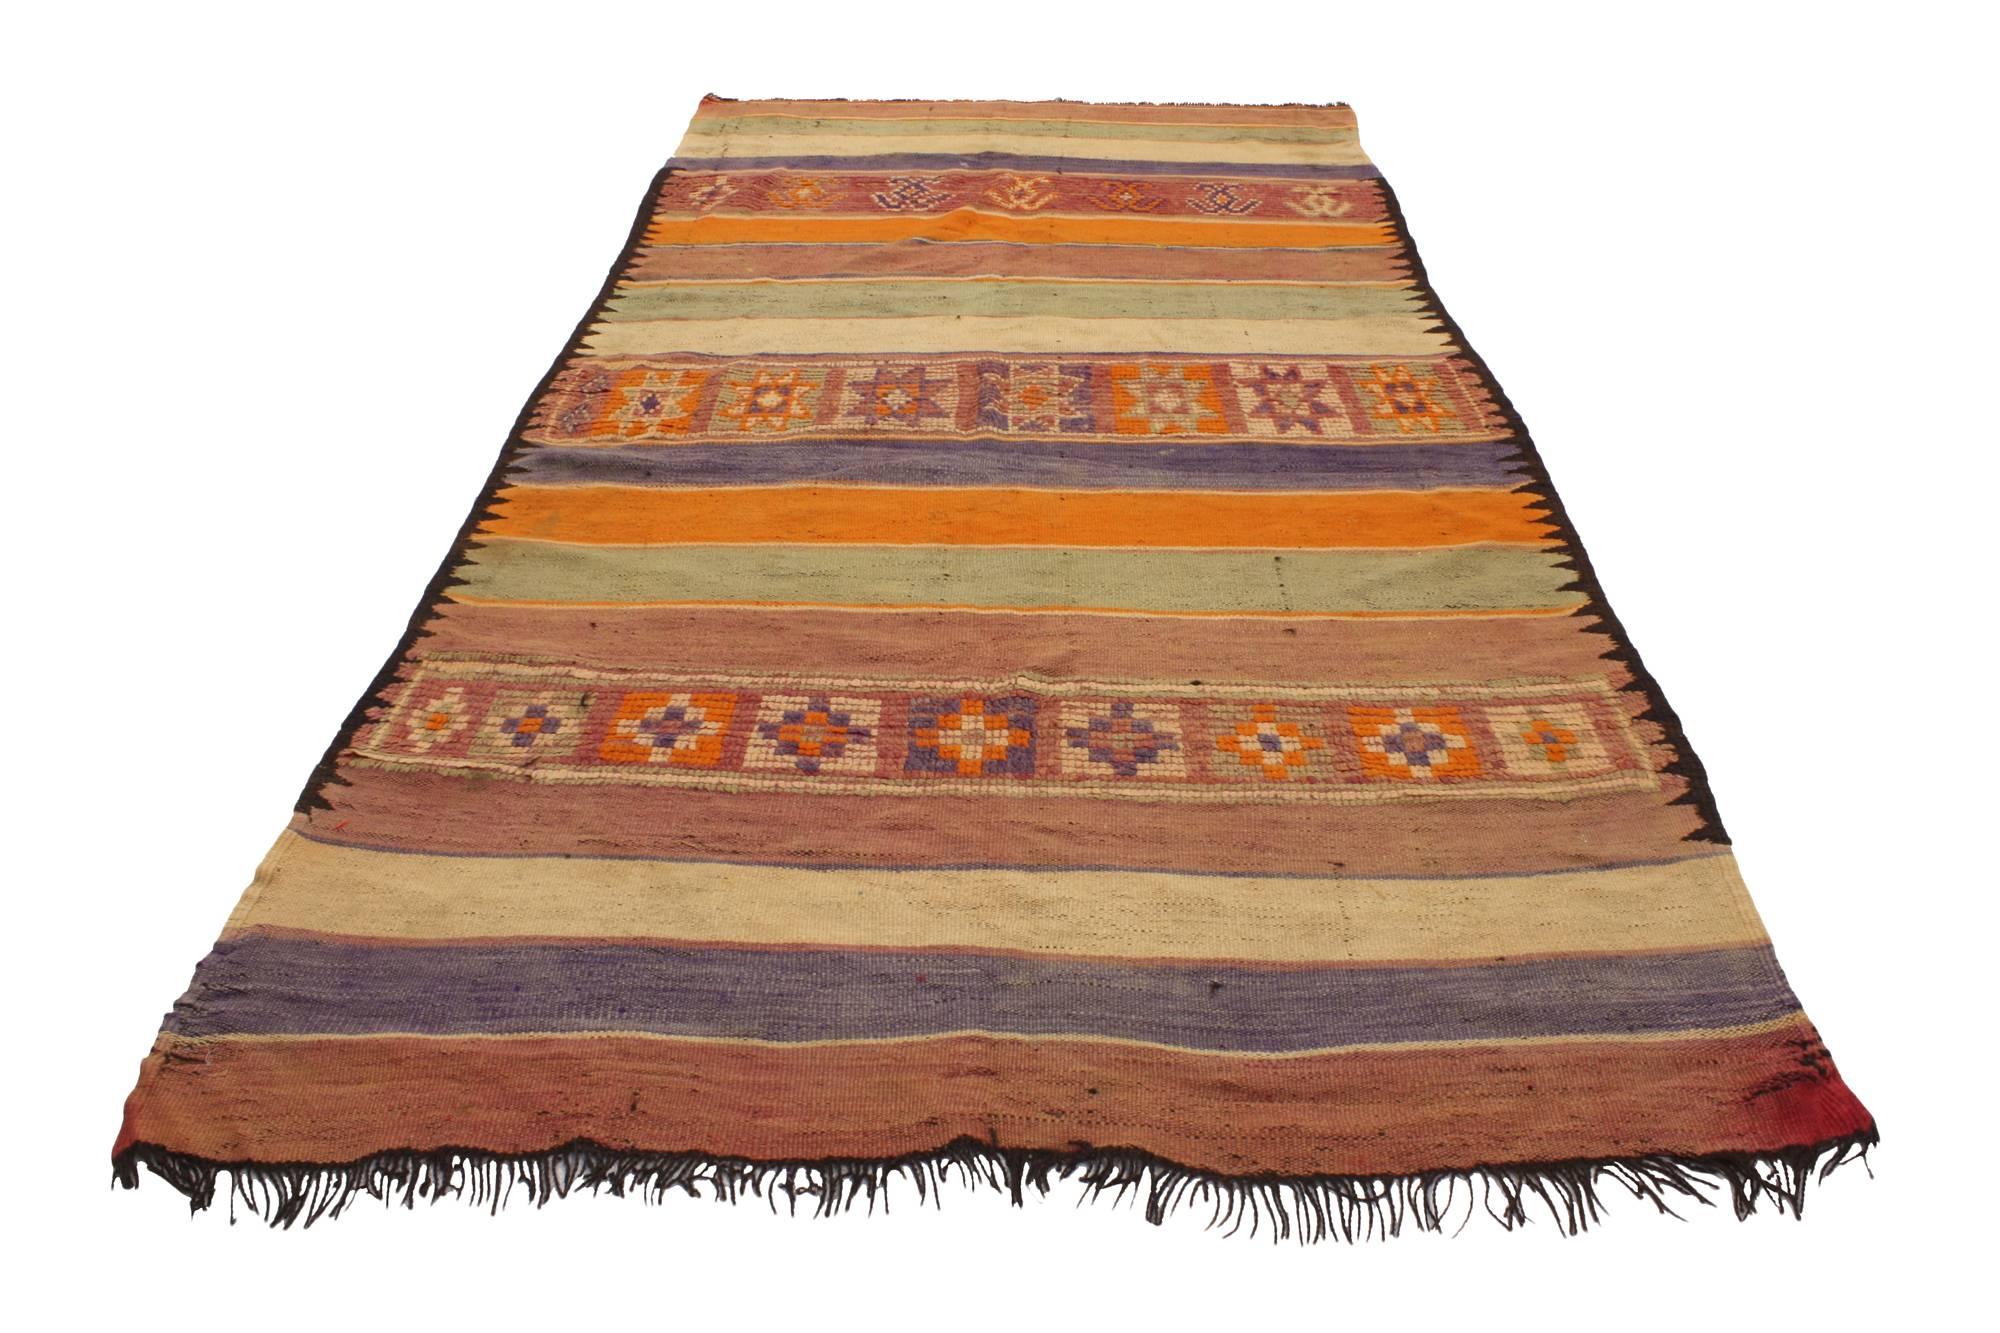 20429 Vintage Berber Moroccan Kilim Rug with Modern Cabin Style, Flat-weave Kilim Rug 05’02 x 09’10. ​​Displaying clean lines and a bold colorway, this hand-woven vintage Berber Moroccan Kilim rug can create a global look from around the world! The